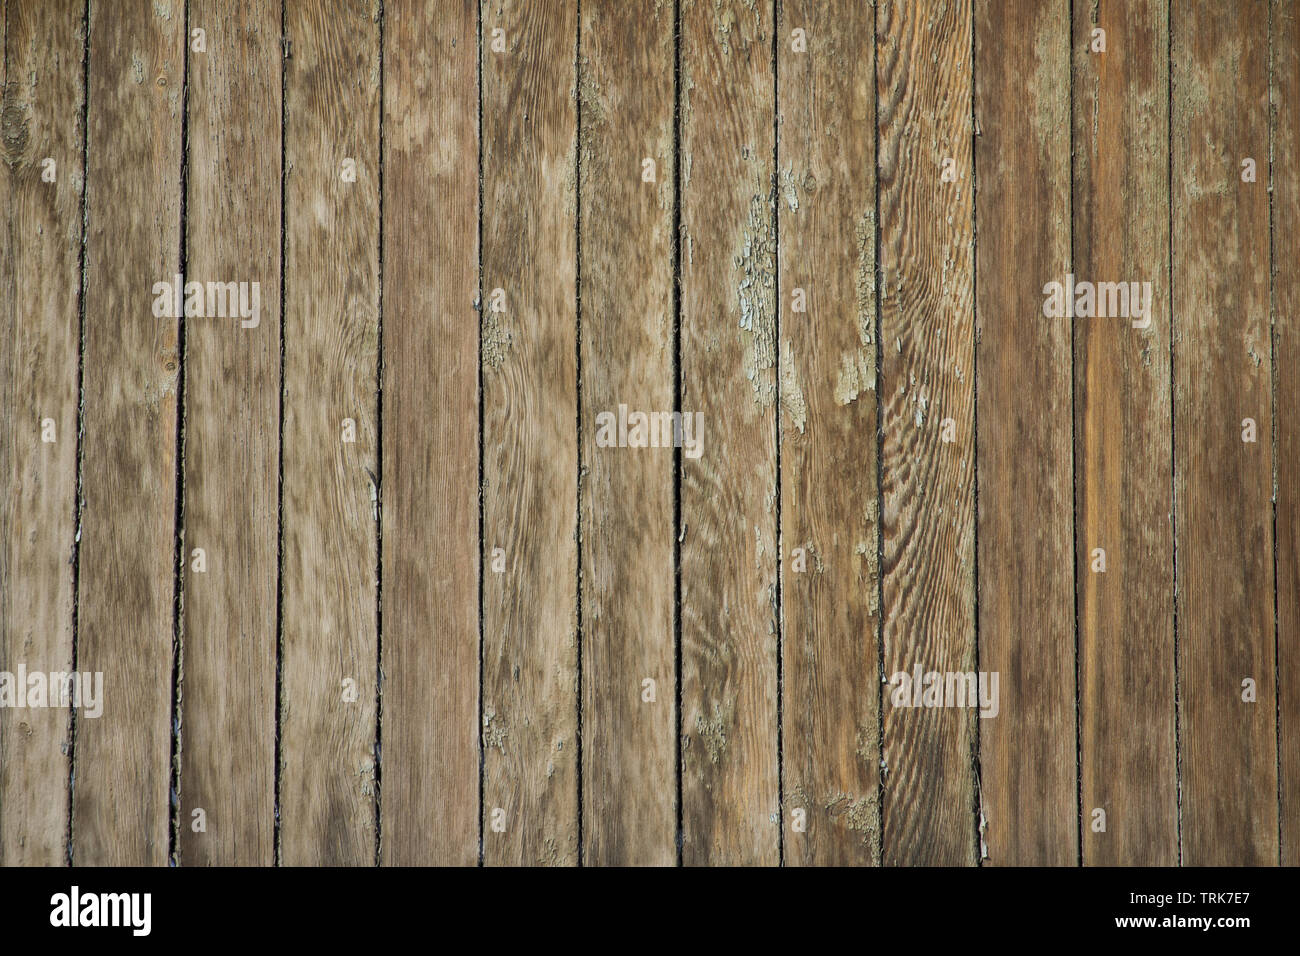 Dark wood color repeat background .wood texture. abstract natural background  with surface wooden pattern grain Stock Photo - Alamy